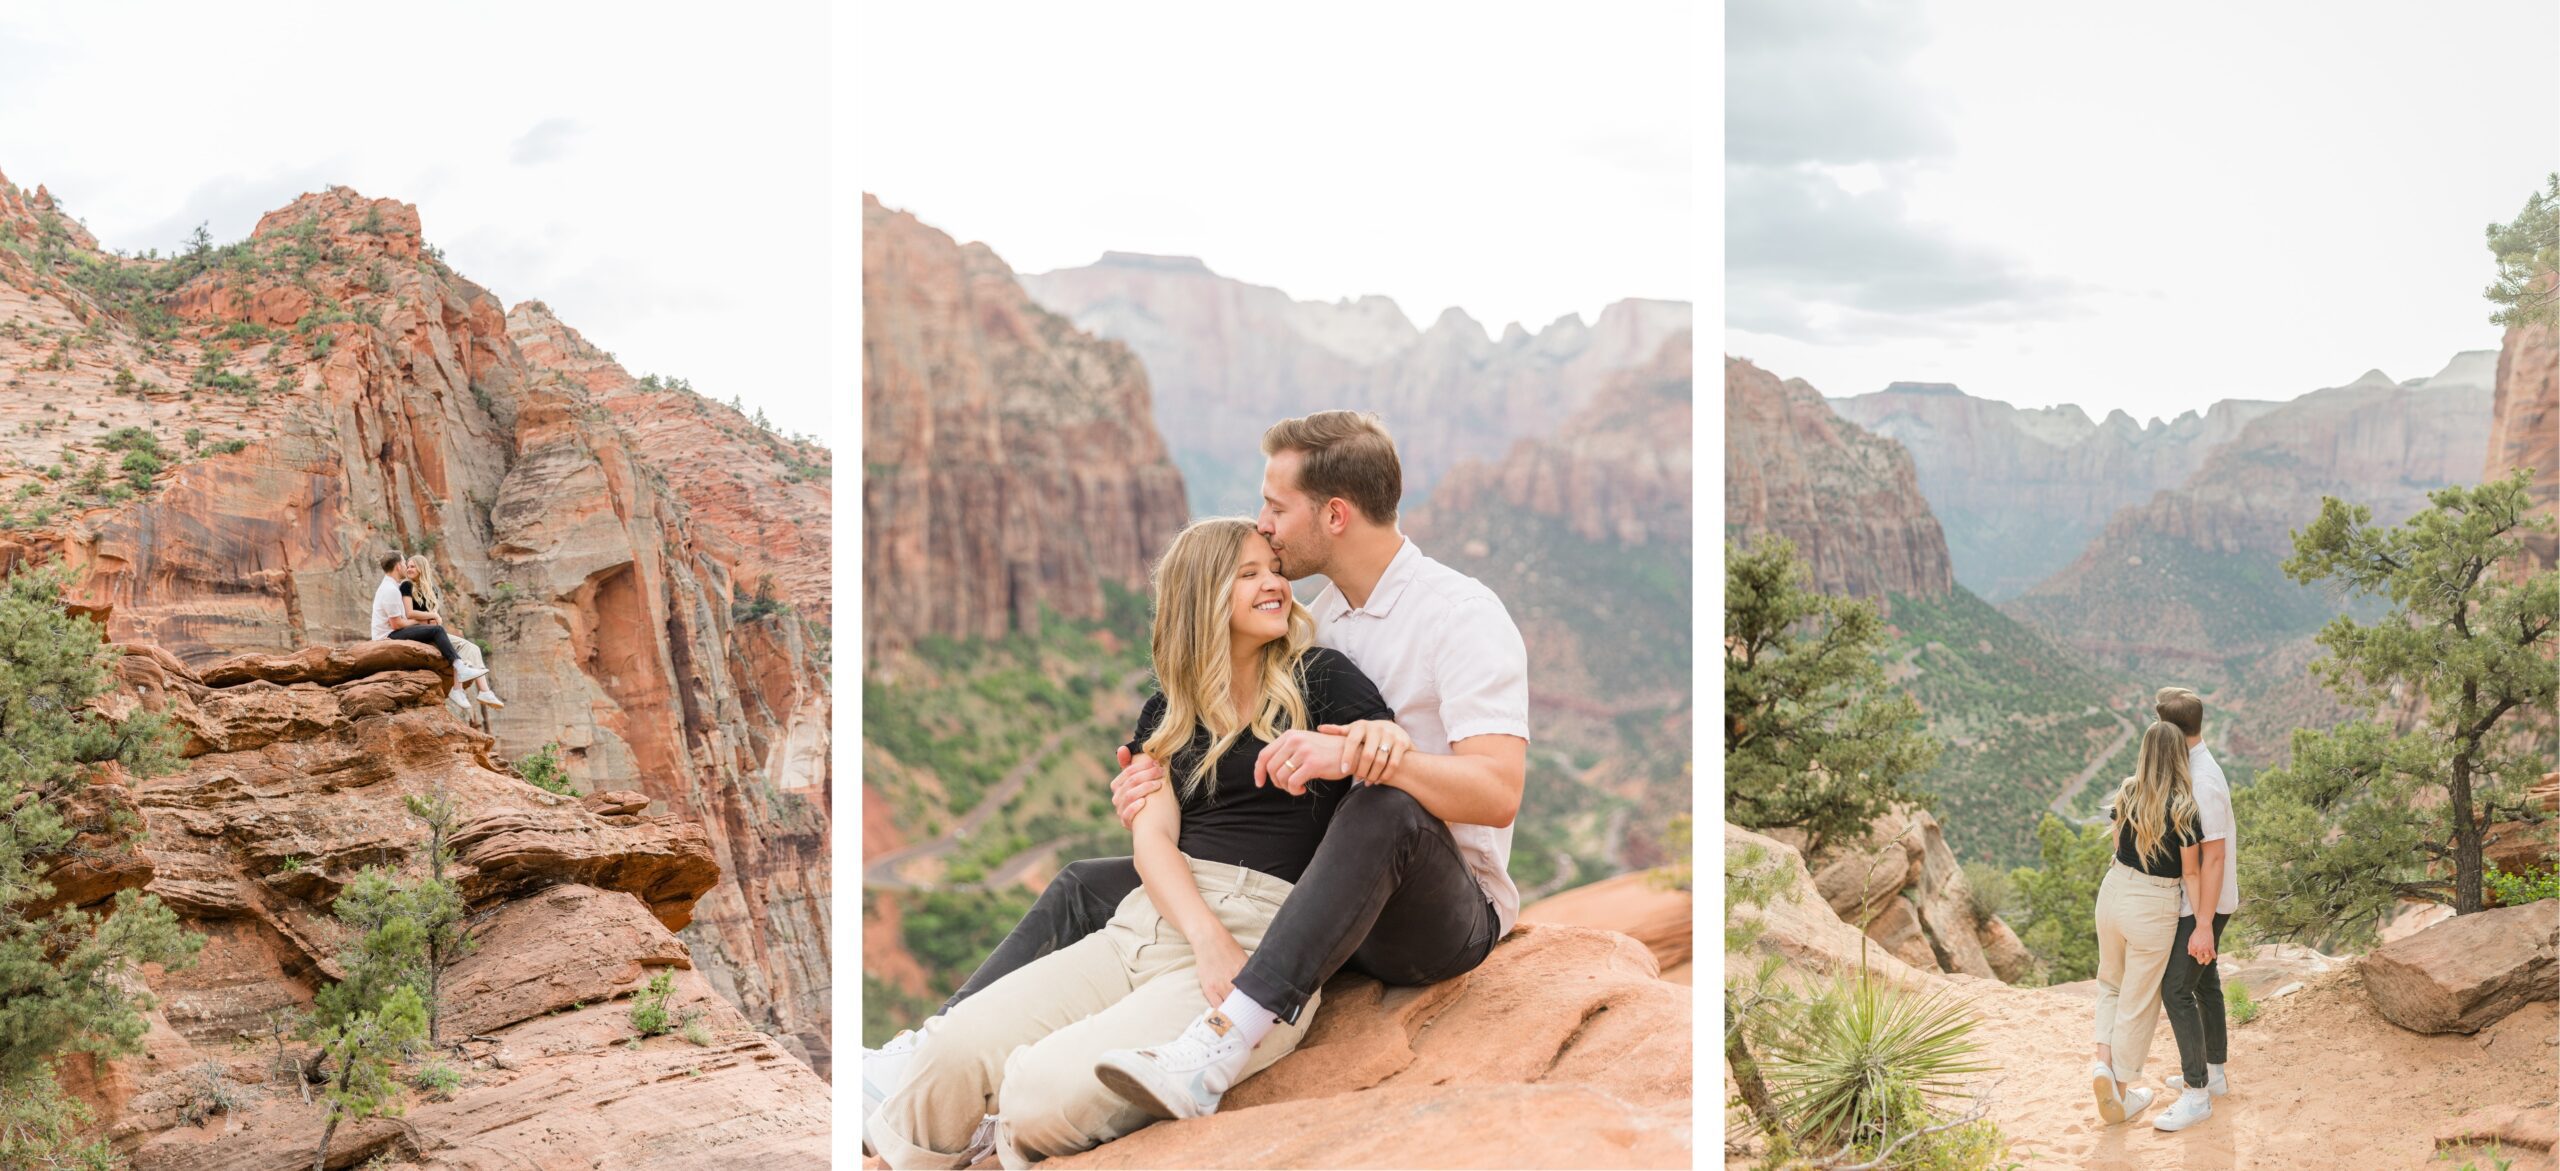 Zion canyon overlook portrait session, Southern Utah engagement session with red rocks